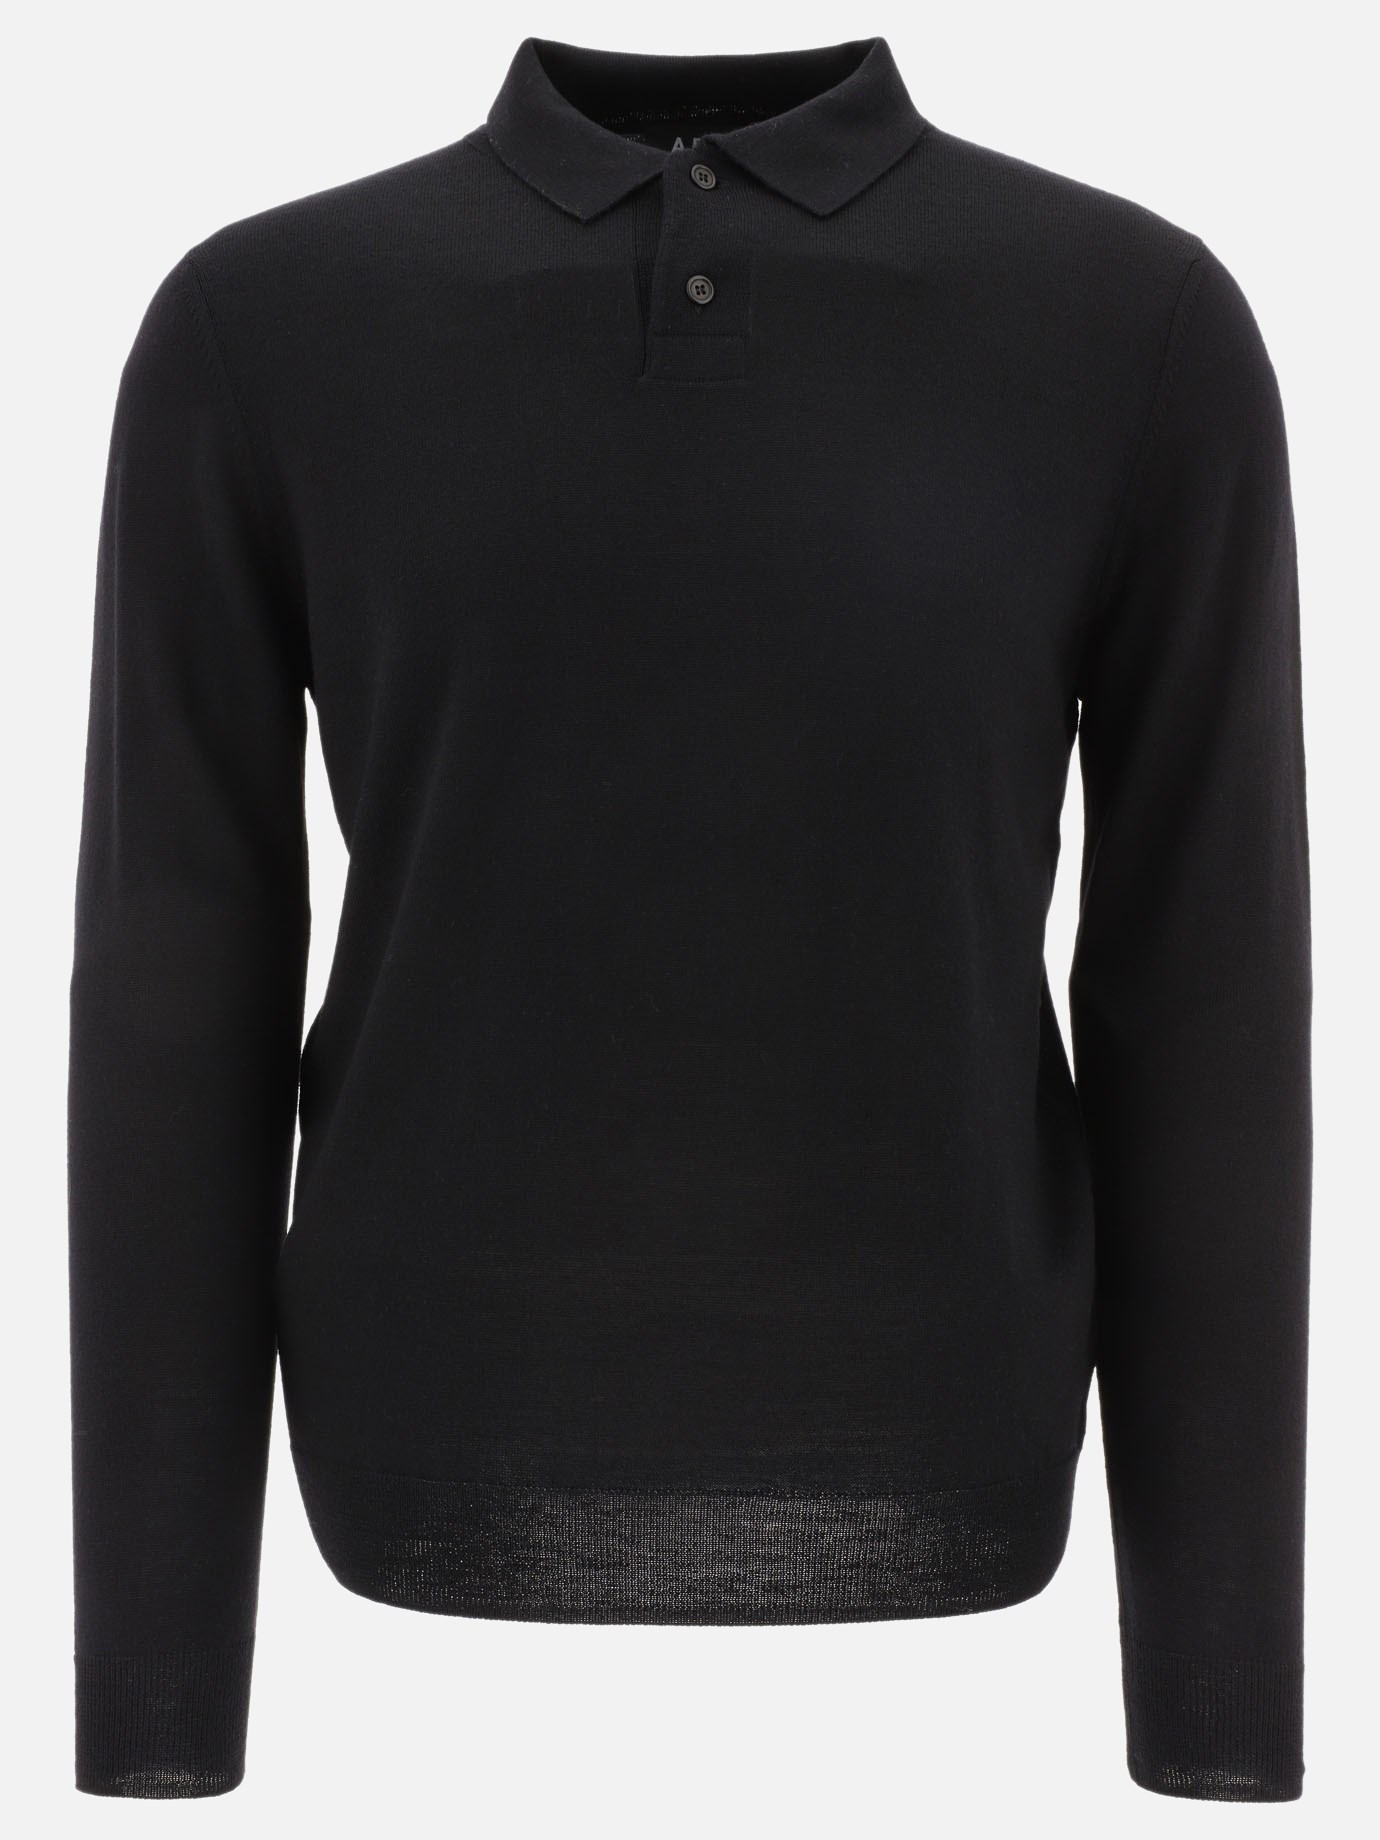 Maglione  Jerry by A.P.C. - 2